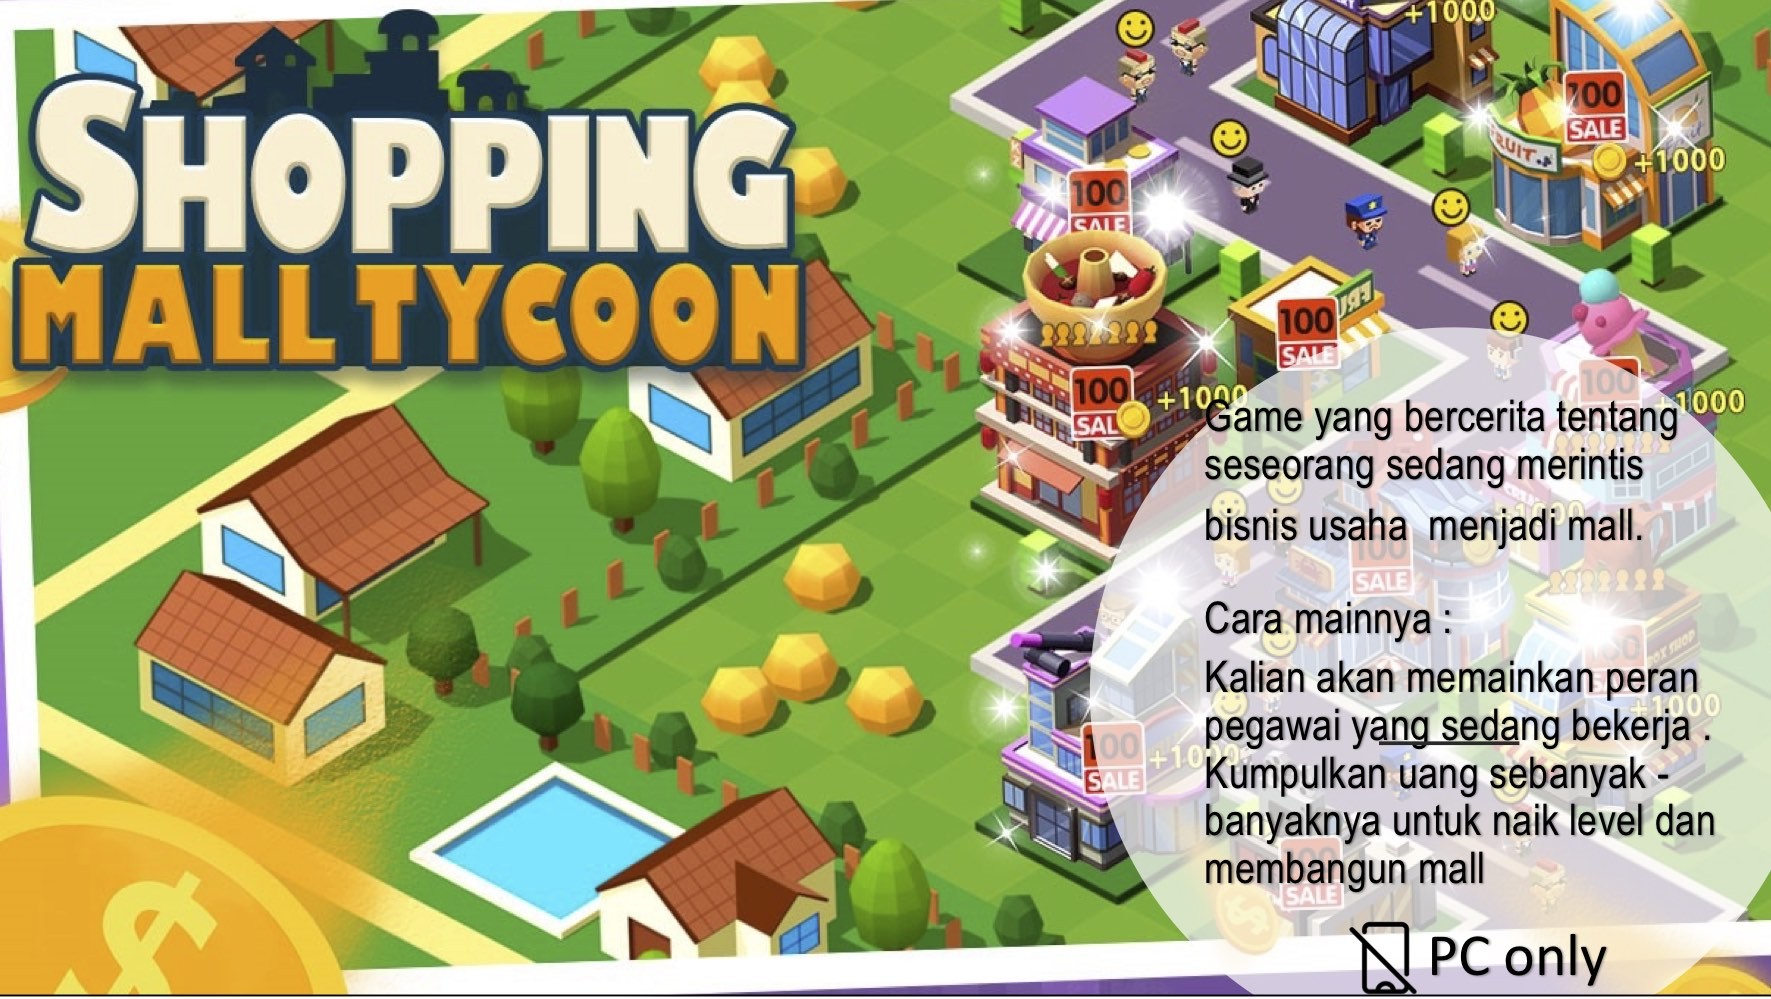 https://www.crazygames.com/game/shopping-mall-tycoon